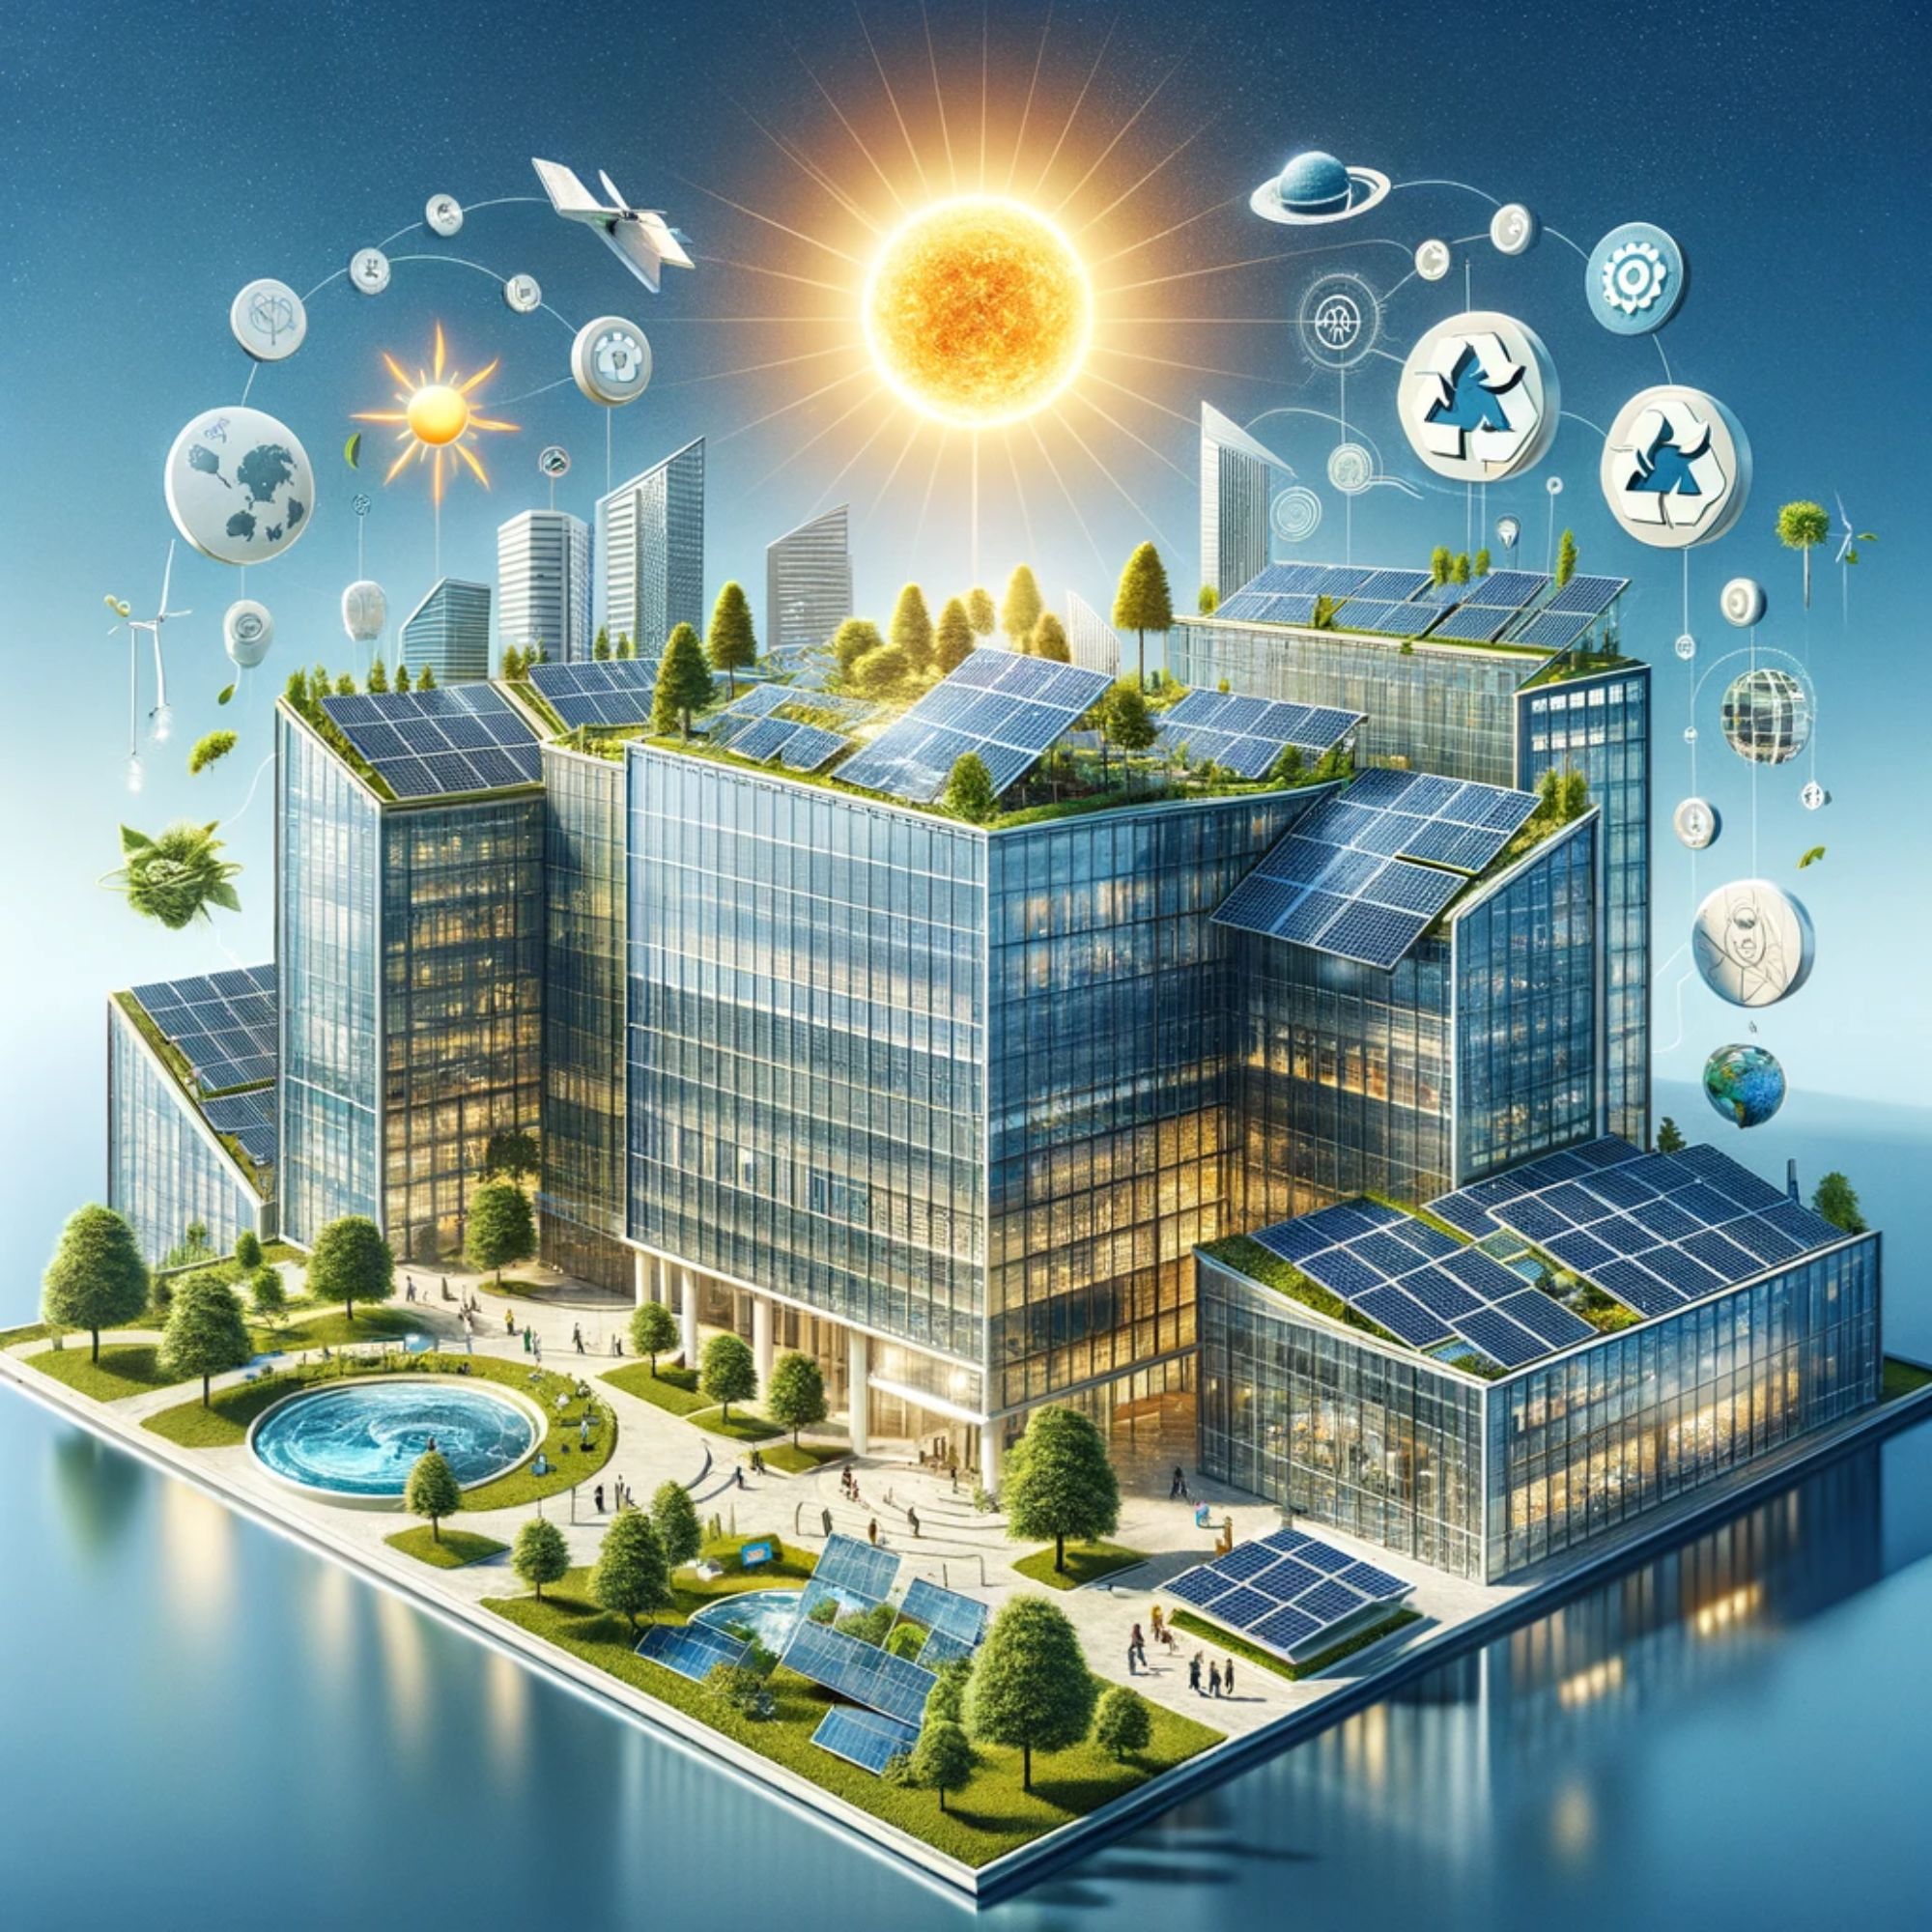 Harnessing the Sun: The Role of Solar Energy in Corporate Social Responsibility